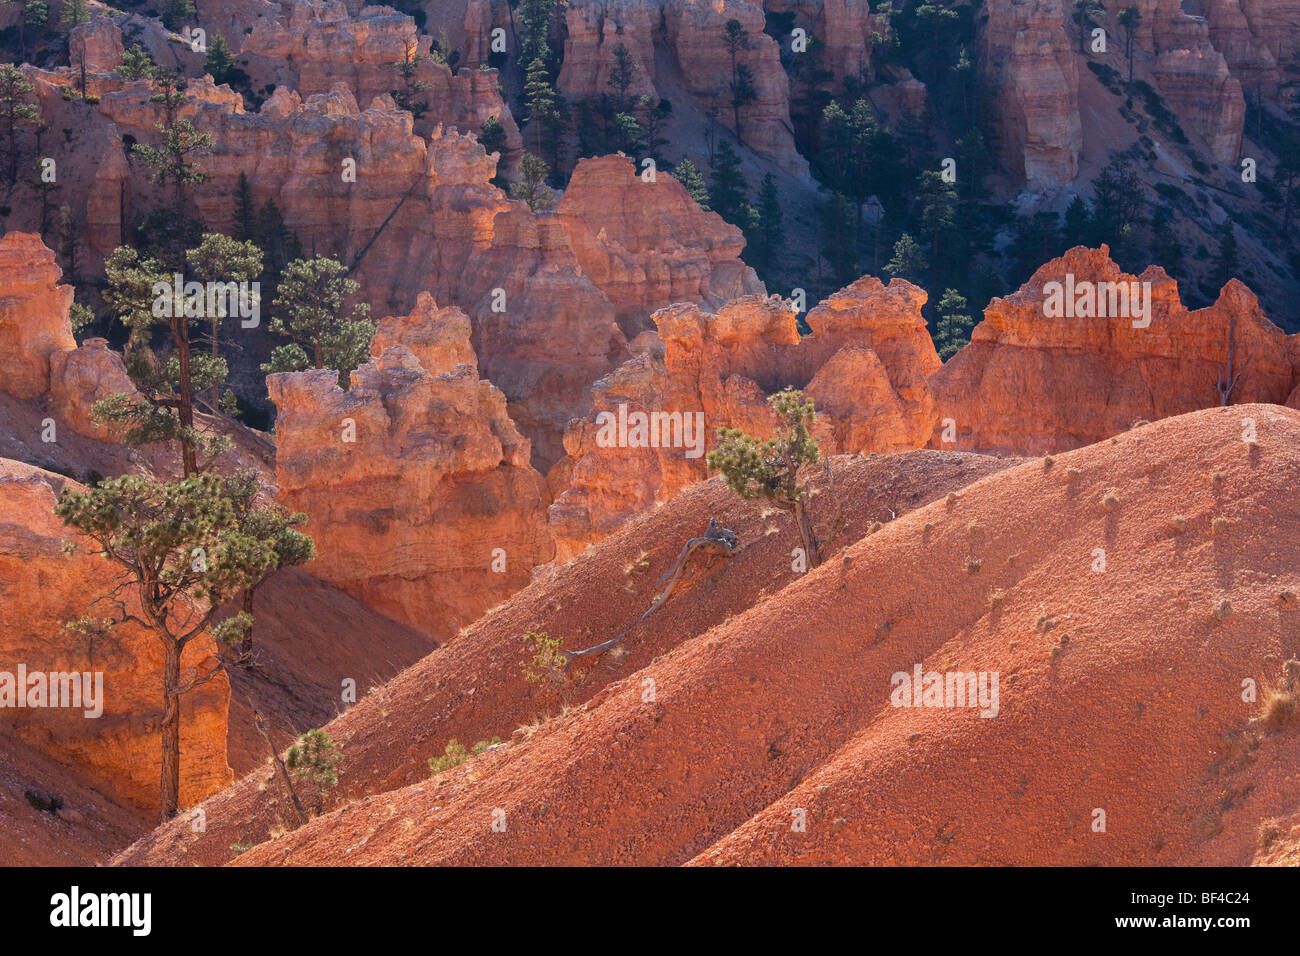 Landscape on the Queens Garden trail, Bryce Canyon National Park, Utah, USA Stock Photo